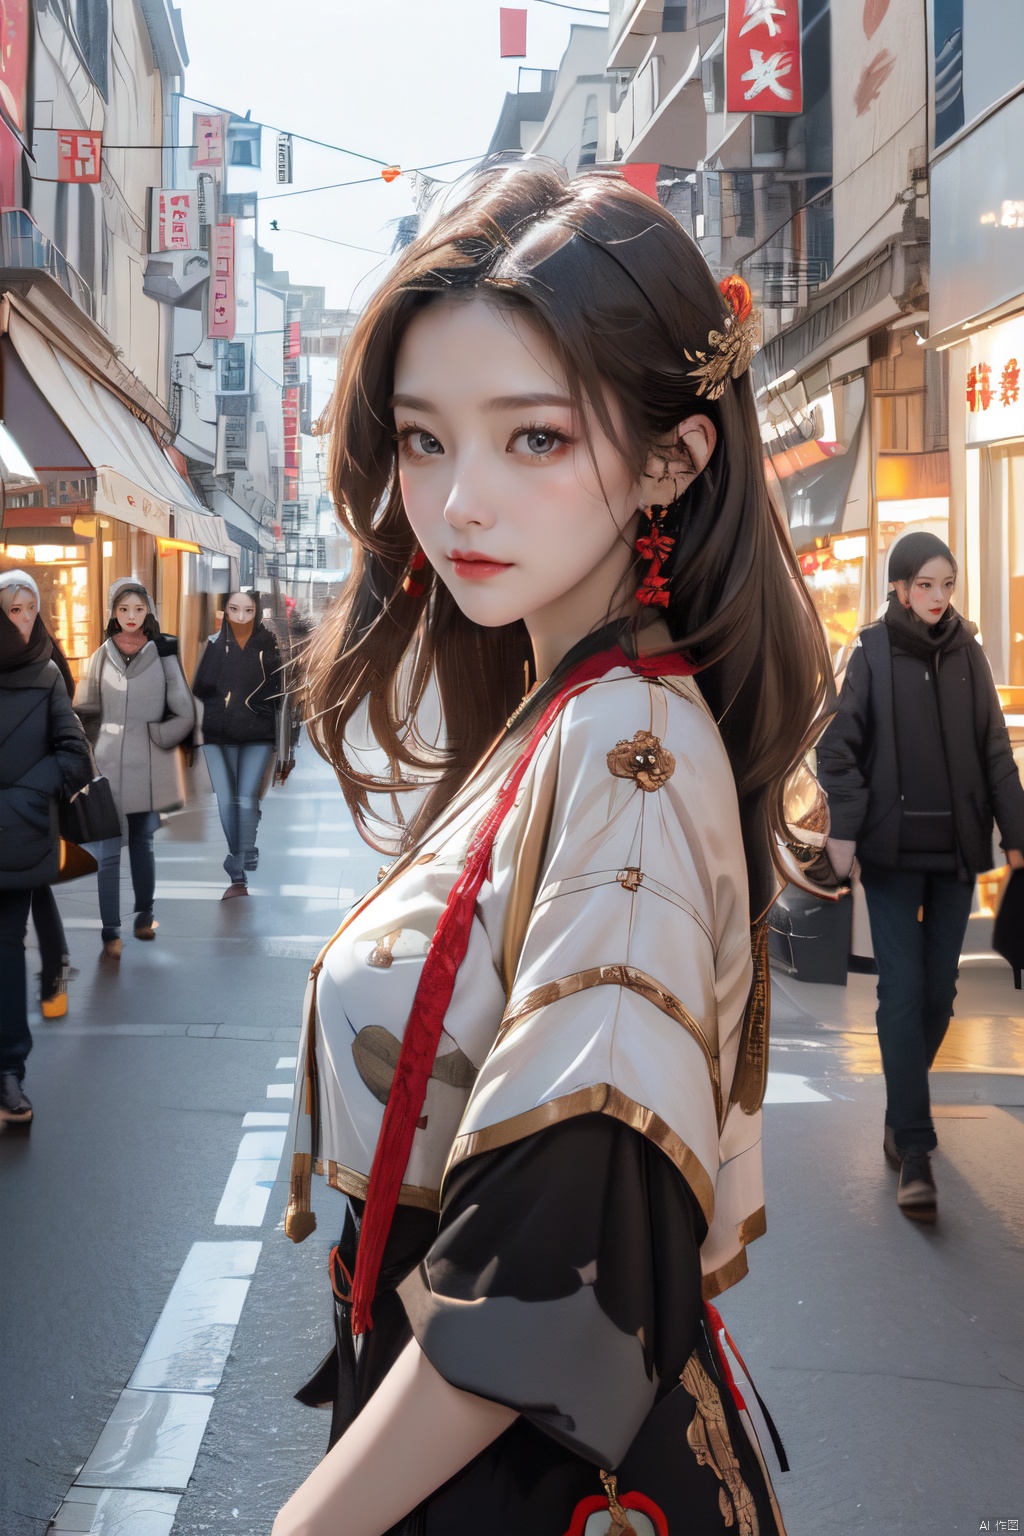 Character image, wide-angle lens, modern urban scenery, simple and lively, bright colors, vitality and creativity, technological intangible cultural heritage, drama, food and fashion elements, soft lighting, friendly and friendly expressions, and gentle emotions.